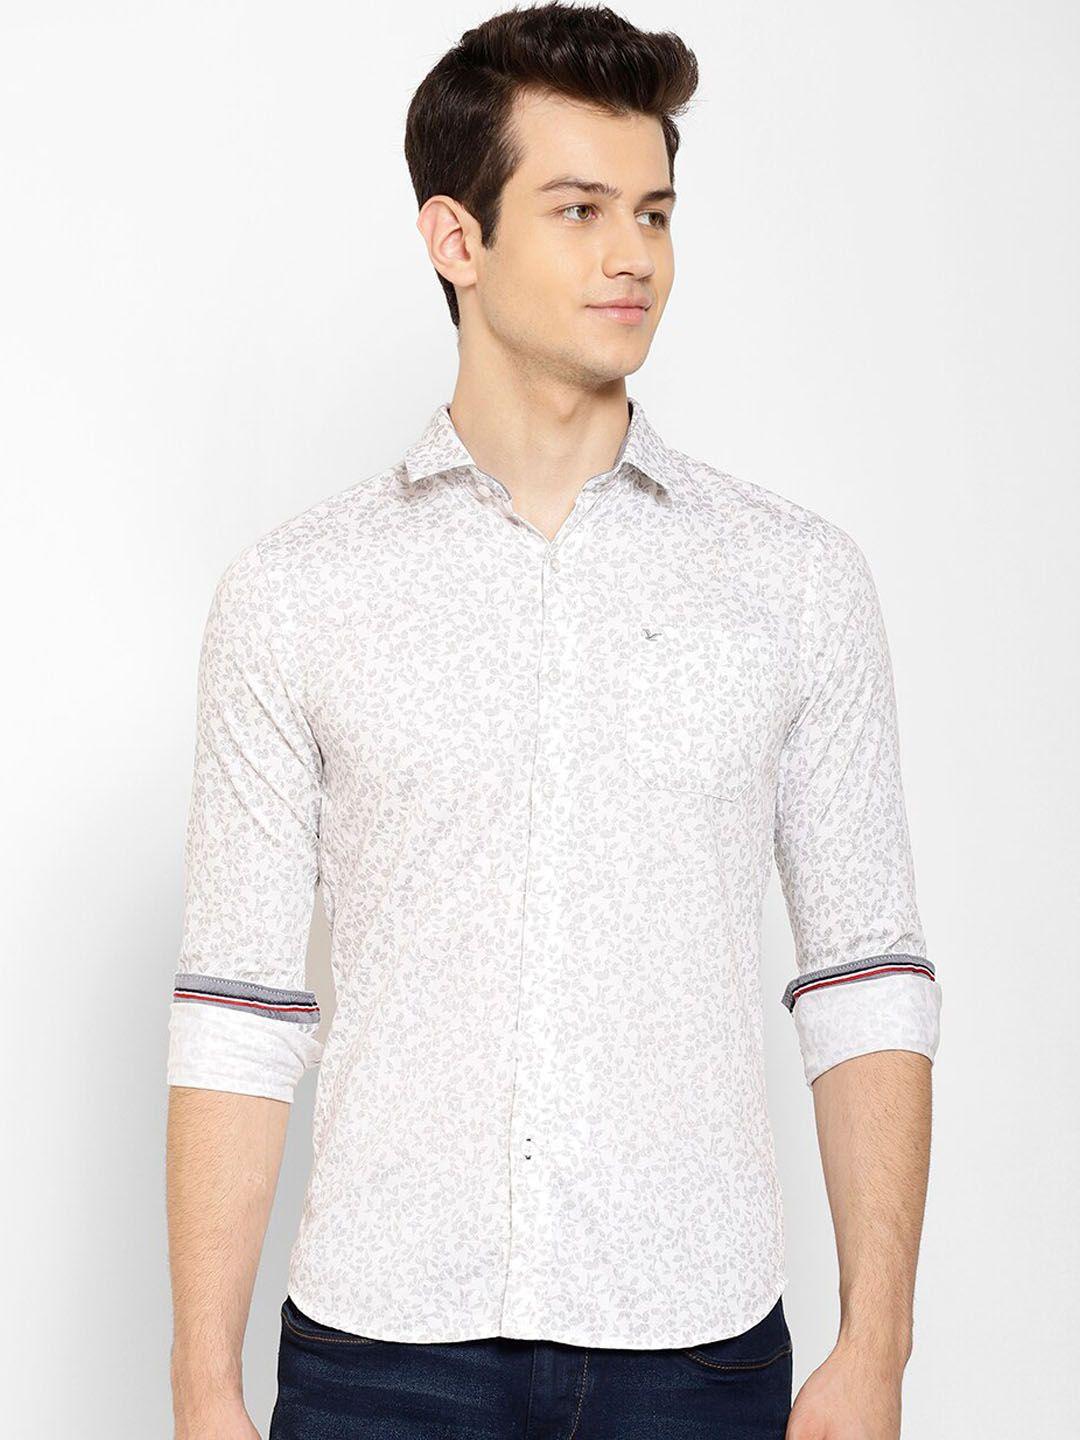 cape canary men white & grey regular fit printed casual shirt